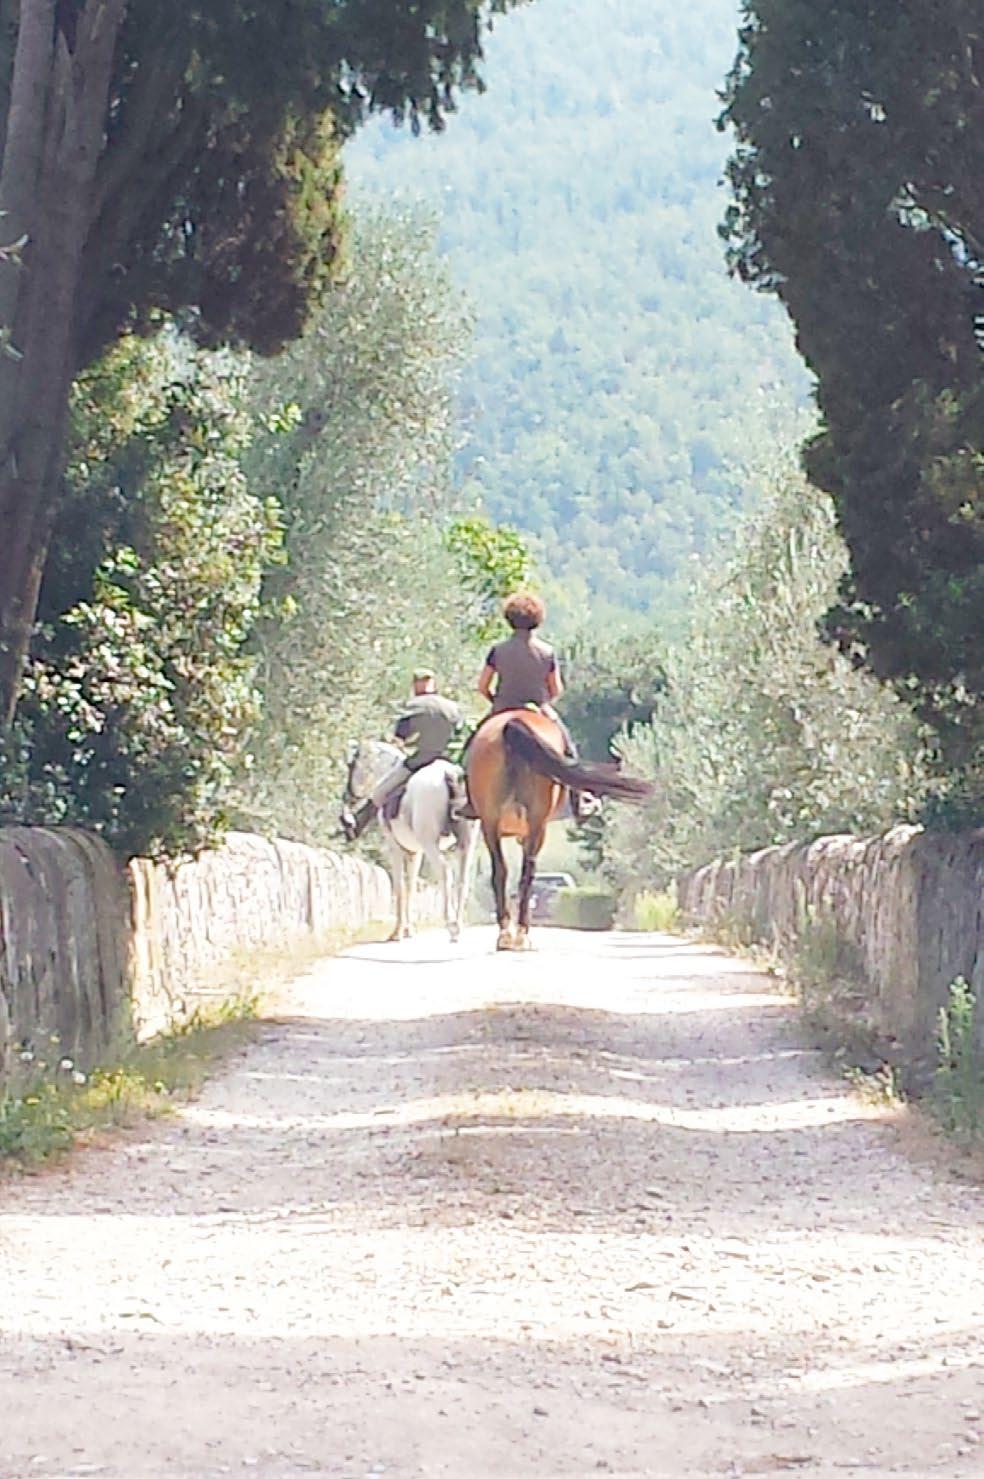 HORSE RIDING Torre a Cona offers its guests the possibility of touring the Estate with horse riding guided excursions suitable for both beginners and experts.